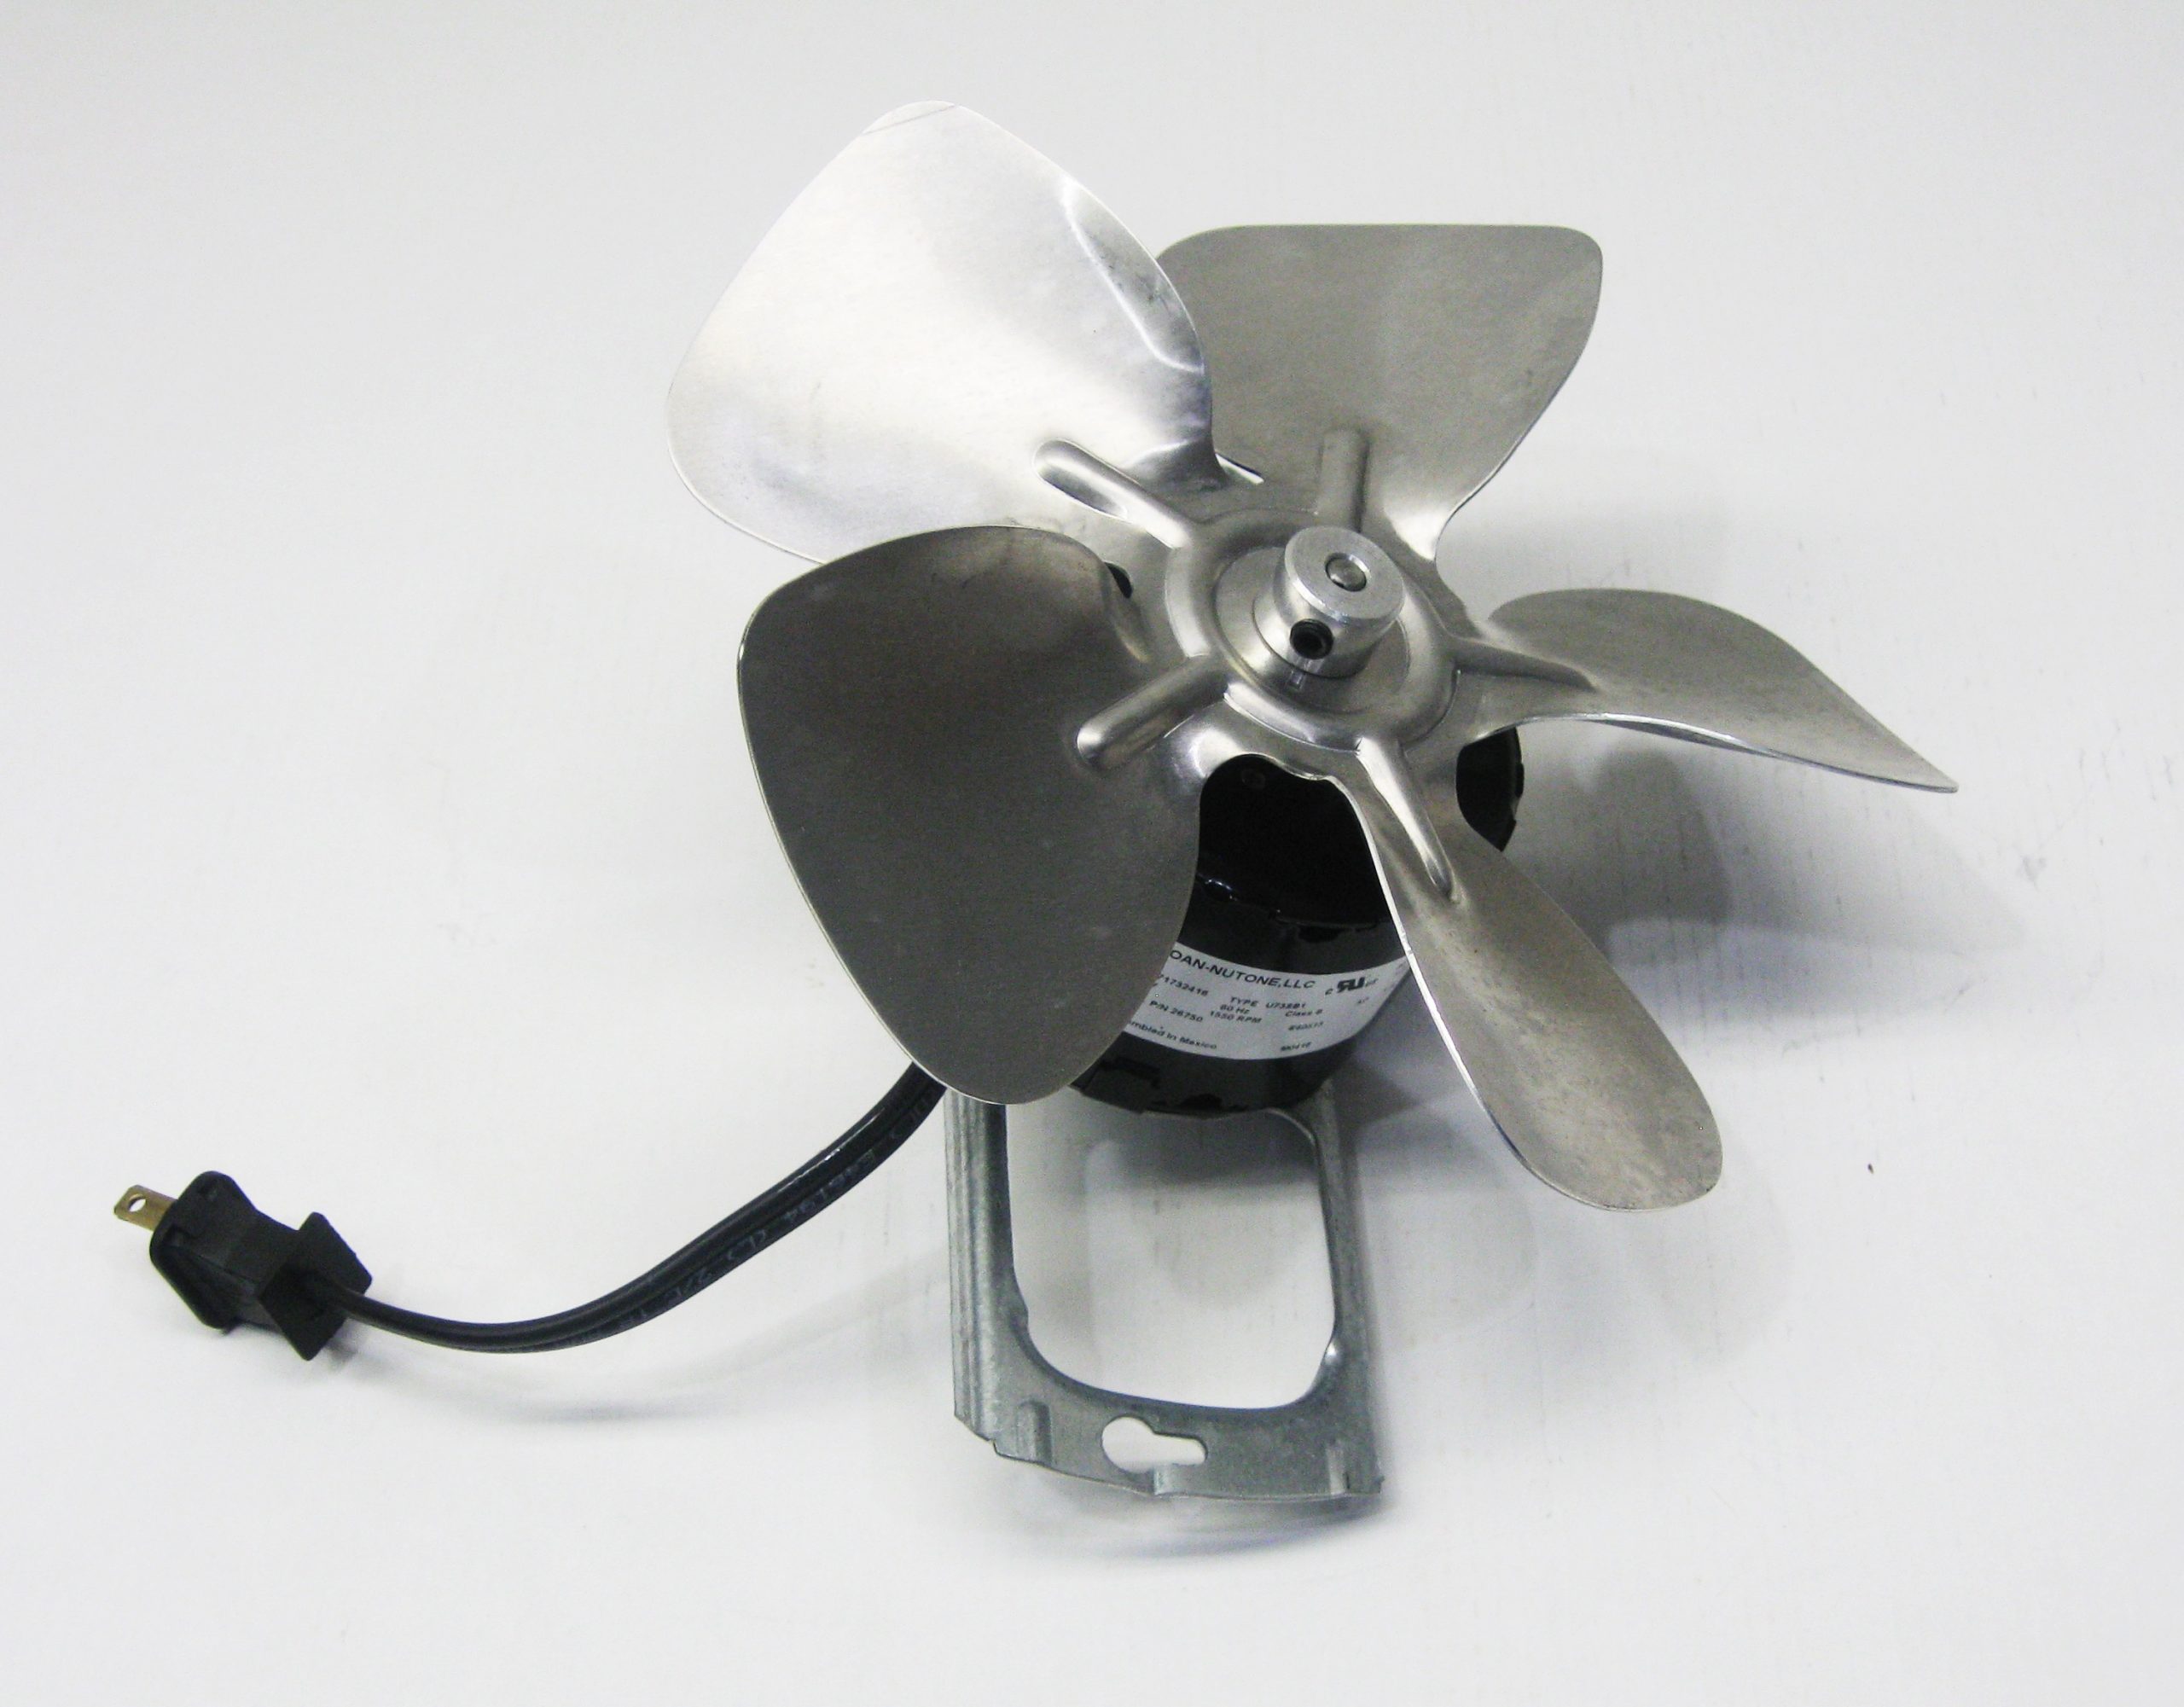 Broan Nutone S69028000 Utility Fan Motor Blade And Bracket throughout proportions 2995 X 2341